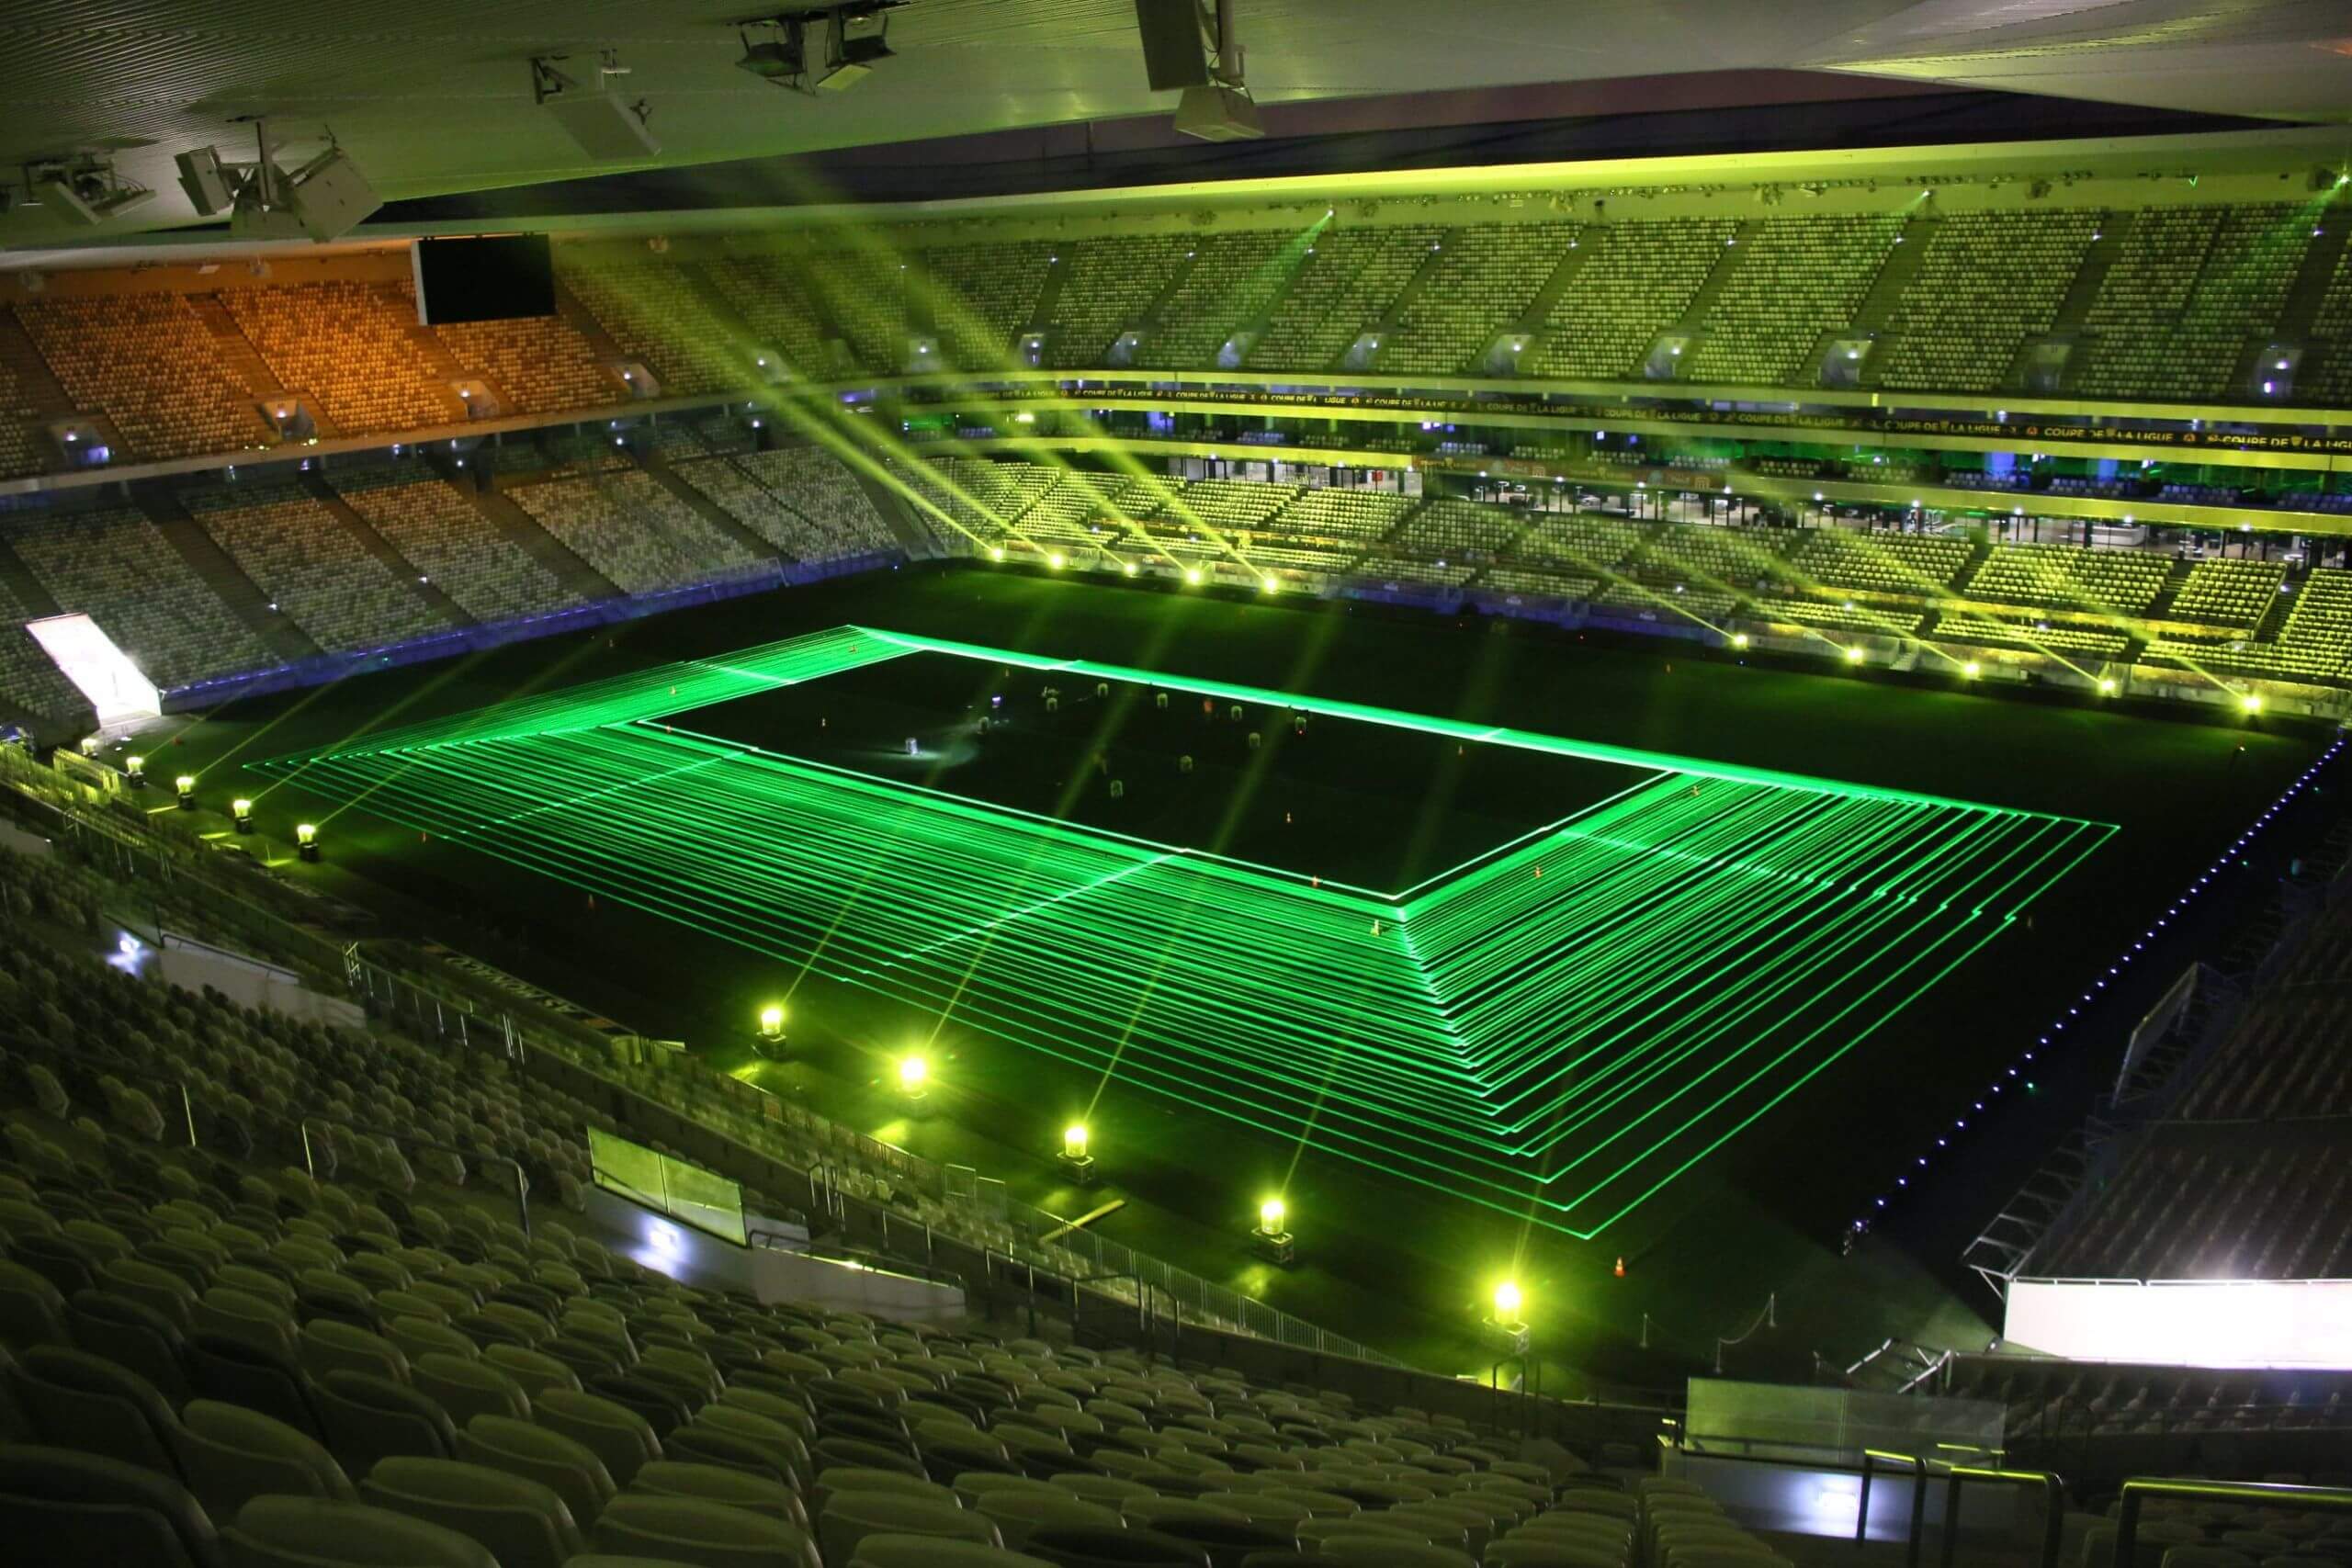 Europe Évènement - Photo of a stadium with green lines projected in the centre